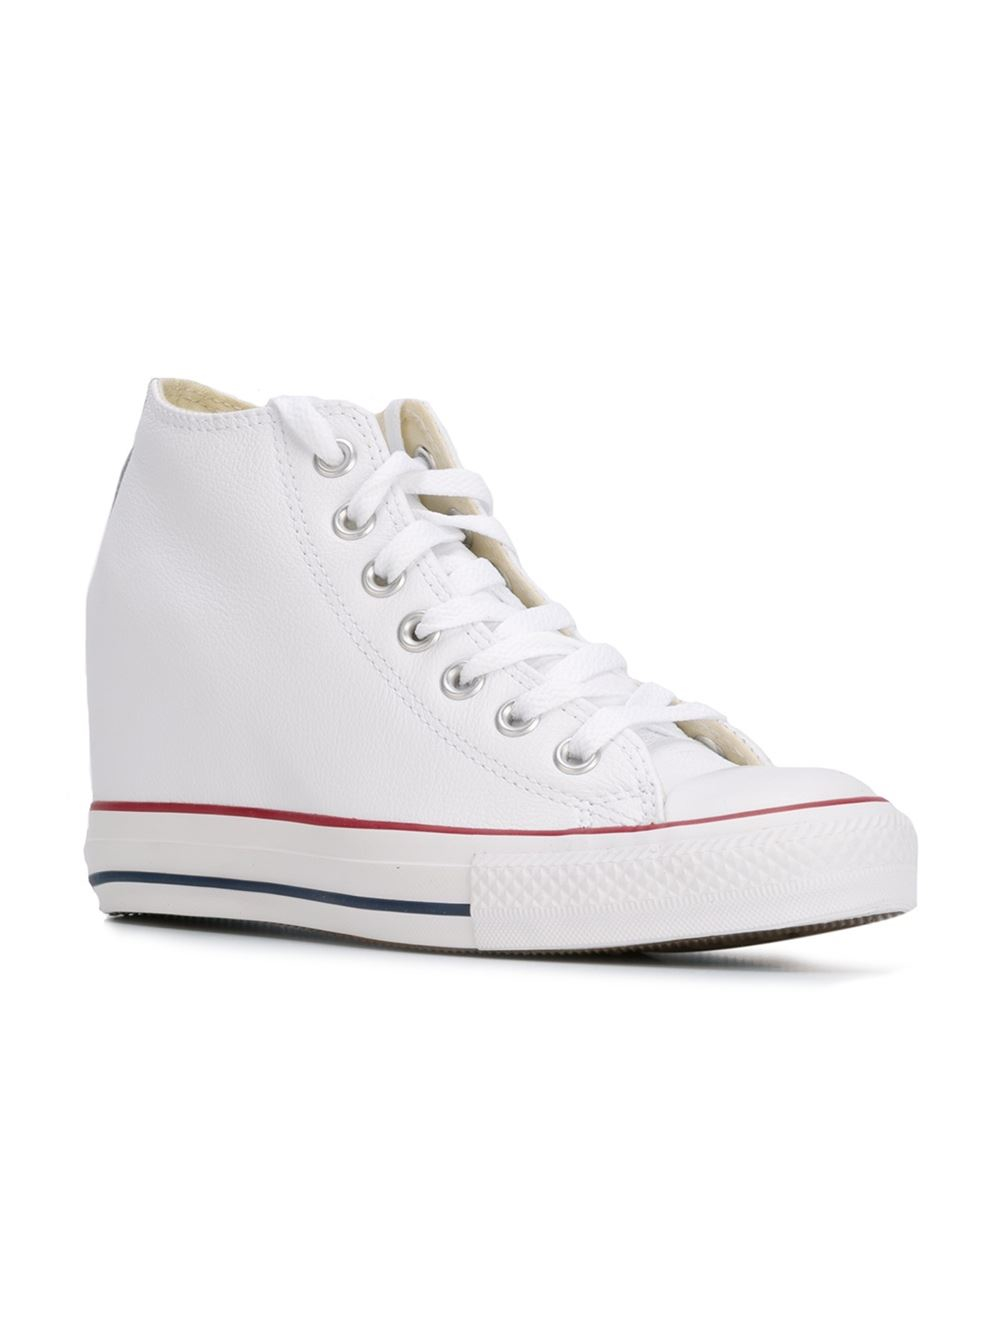 chuck taylor lux wedge